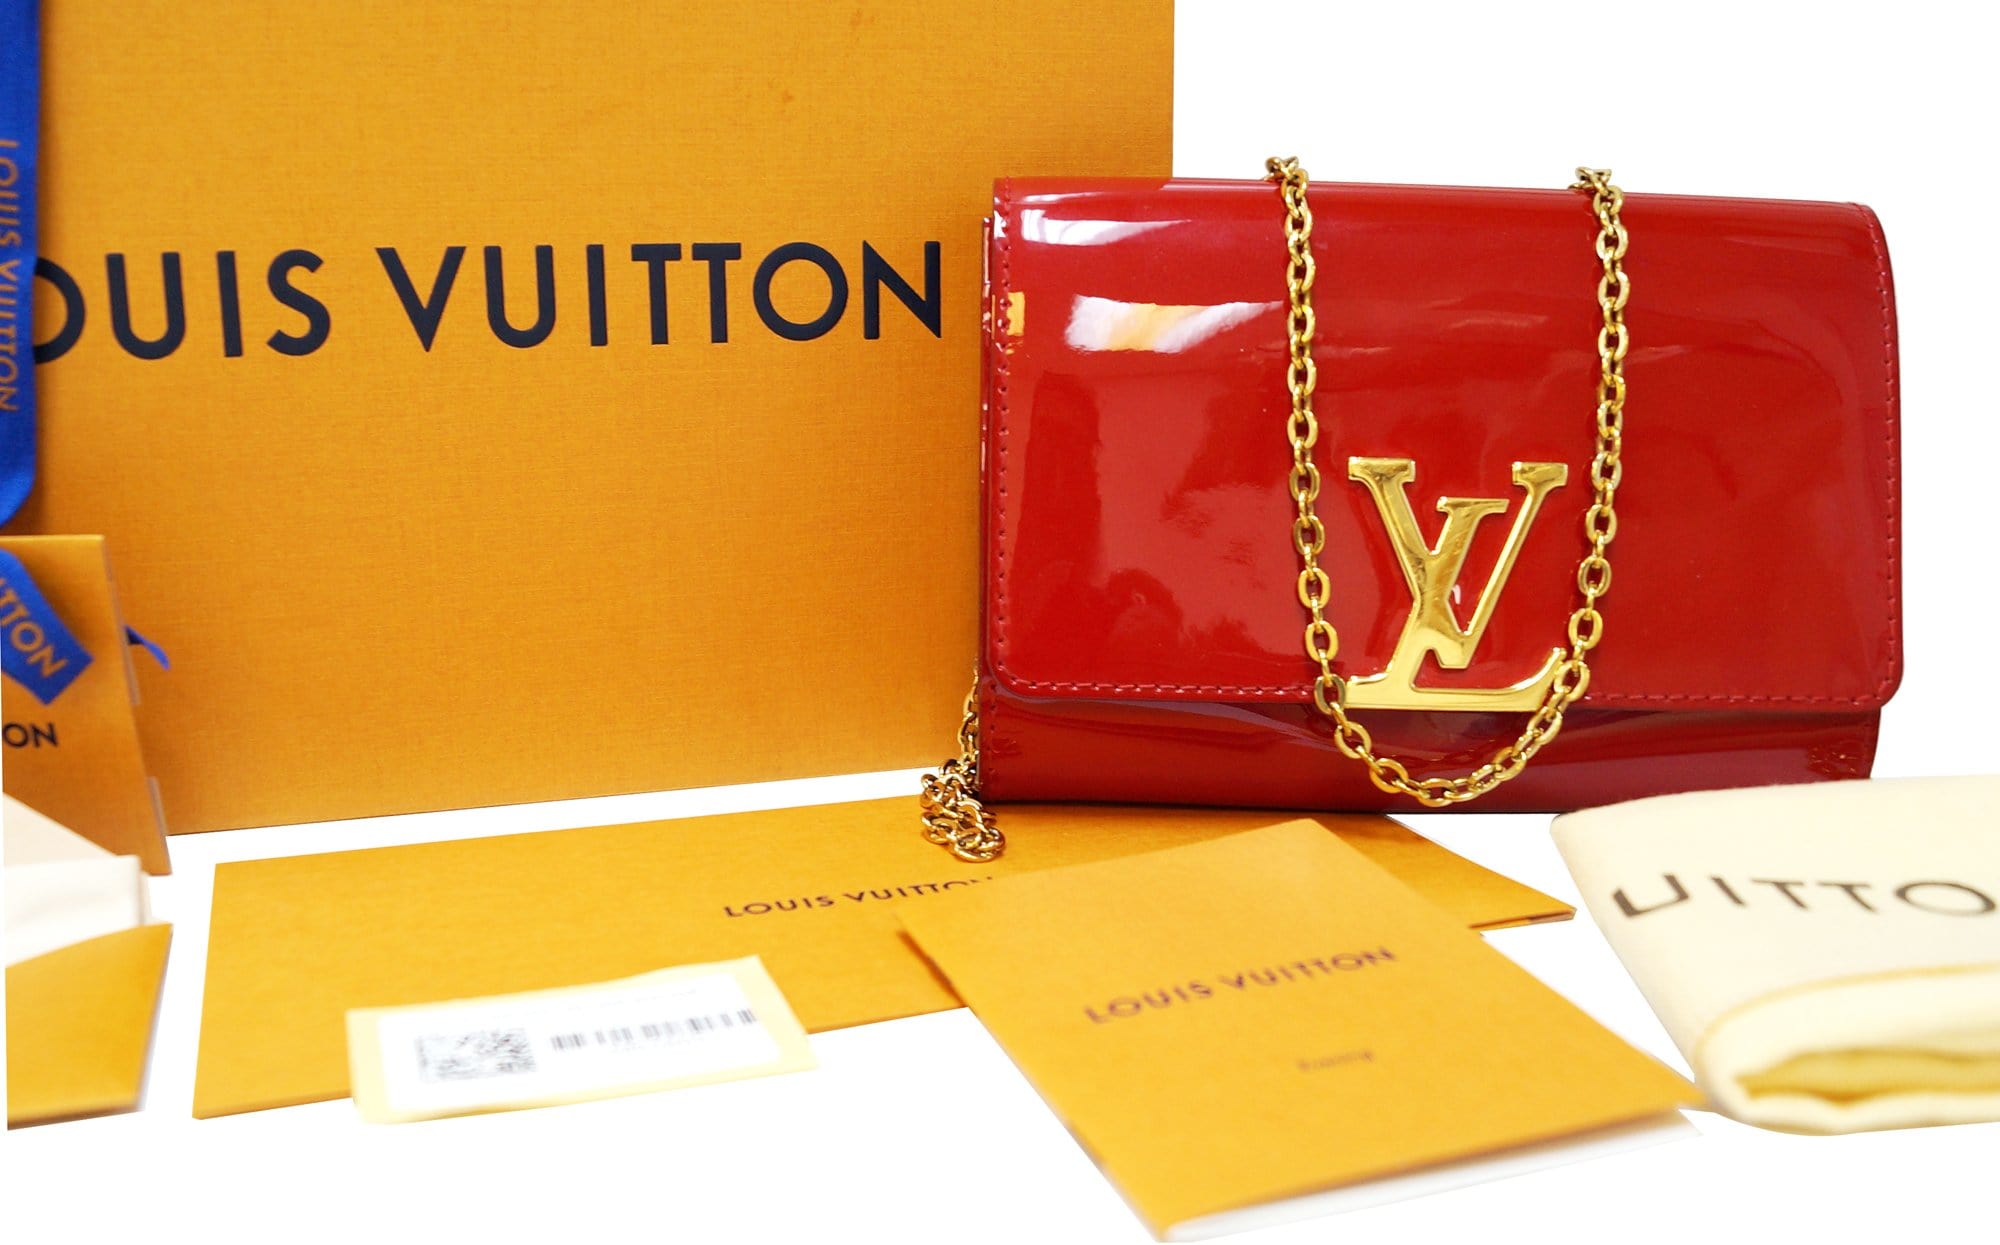 Louis Vuitton - Authenticated Handbag - Patent Leather Red for Women, Very Good Condition